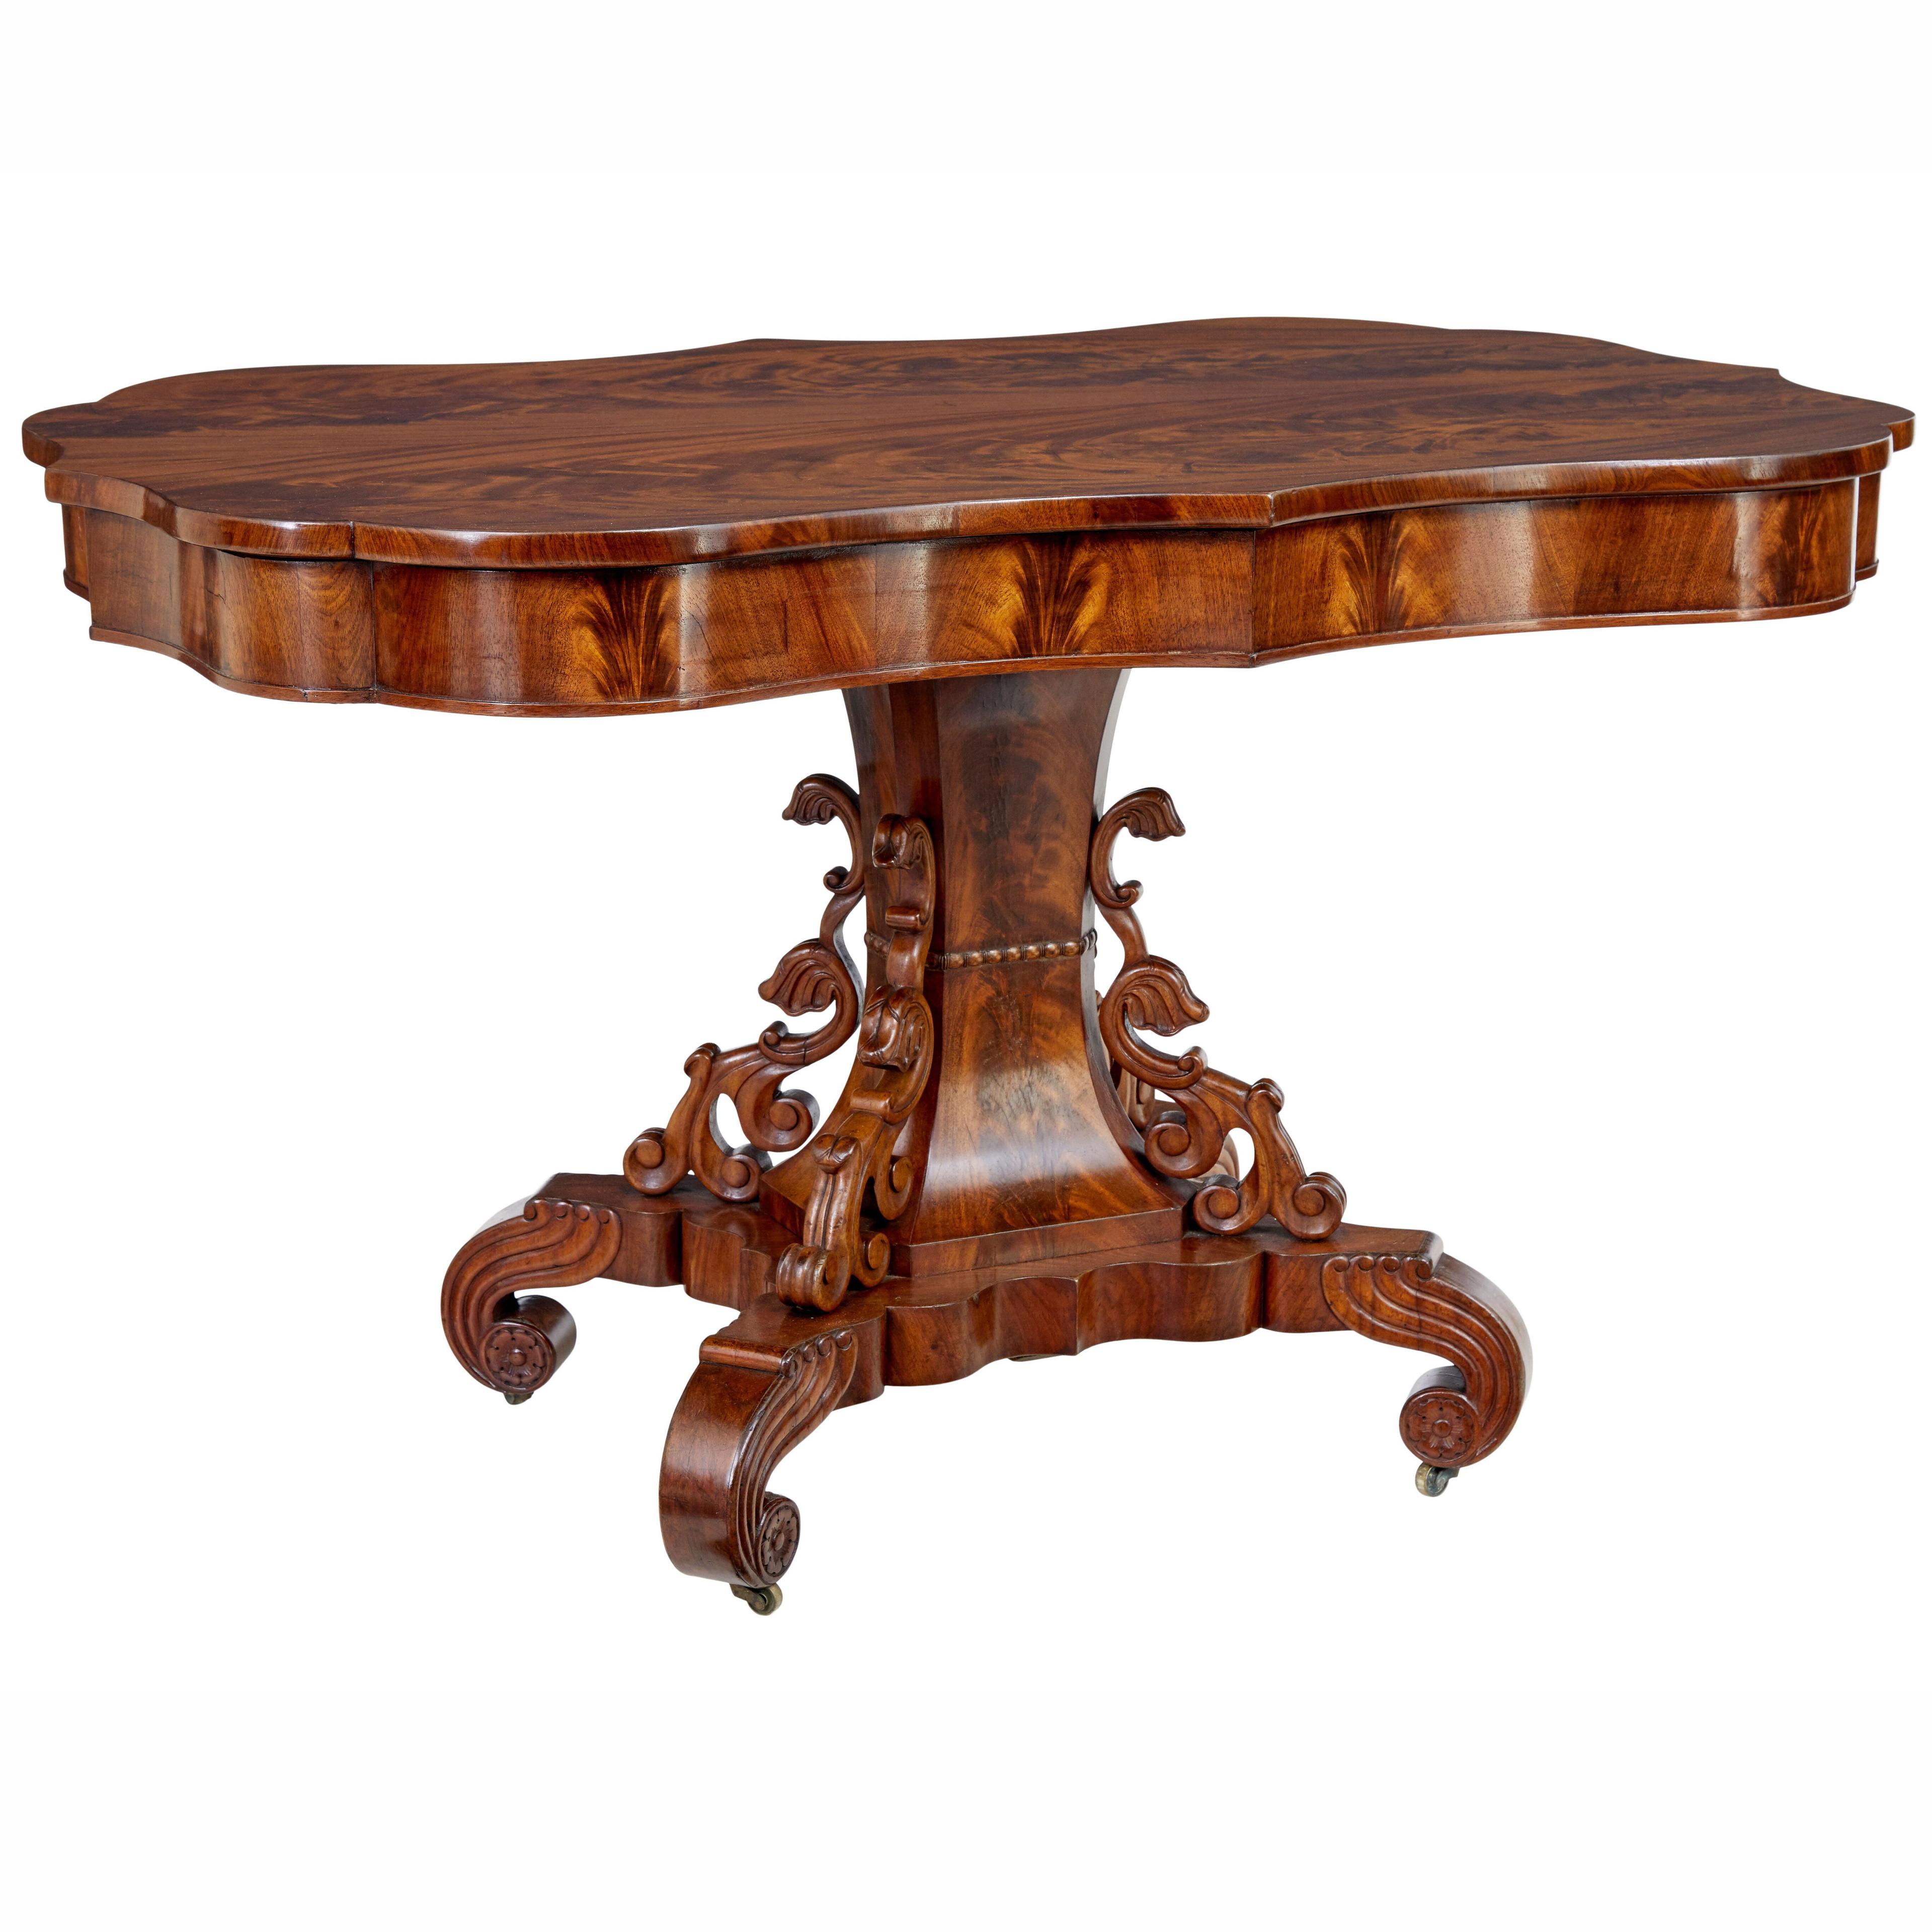 19TH CENTURY DANISH CARVED FLAME MAHOGANY CENTER TABLE